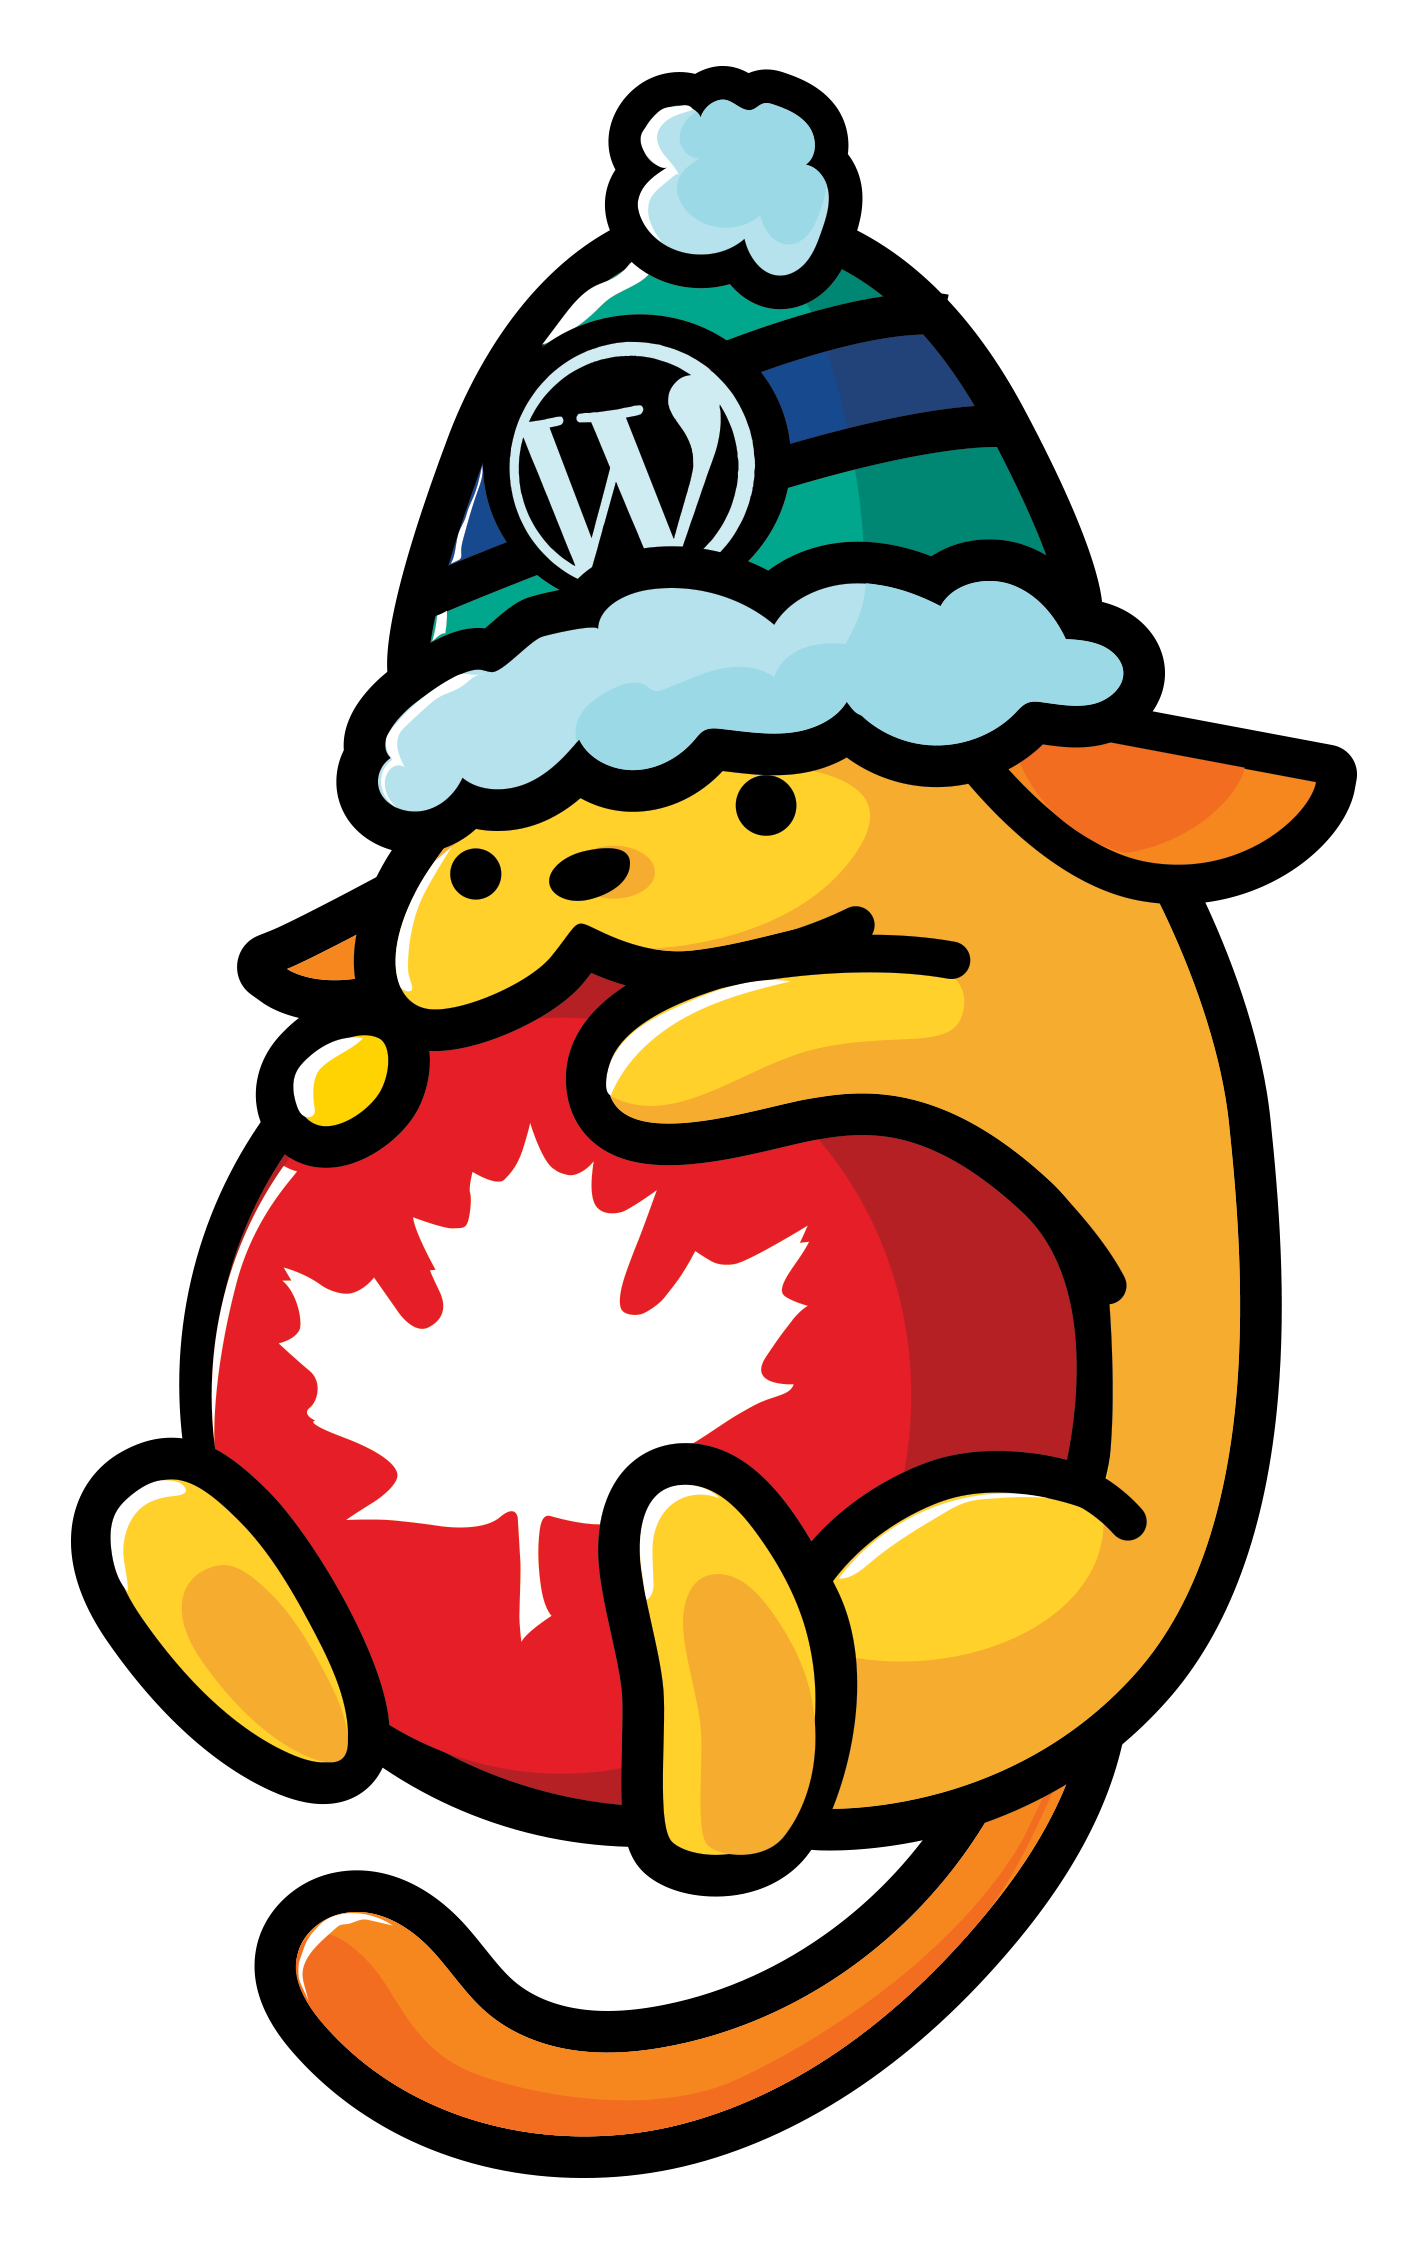 A Wapuu with a touque holding a red ball with a Maple Leaf on the front